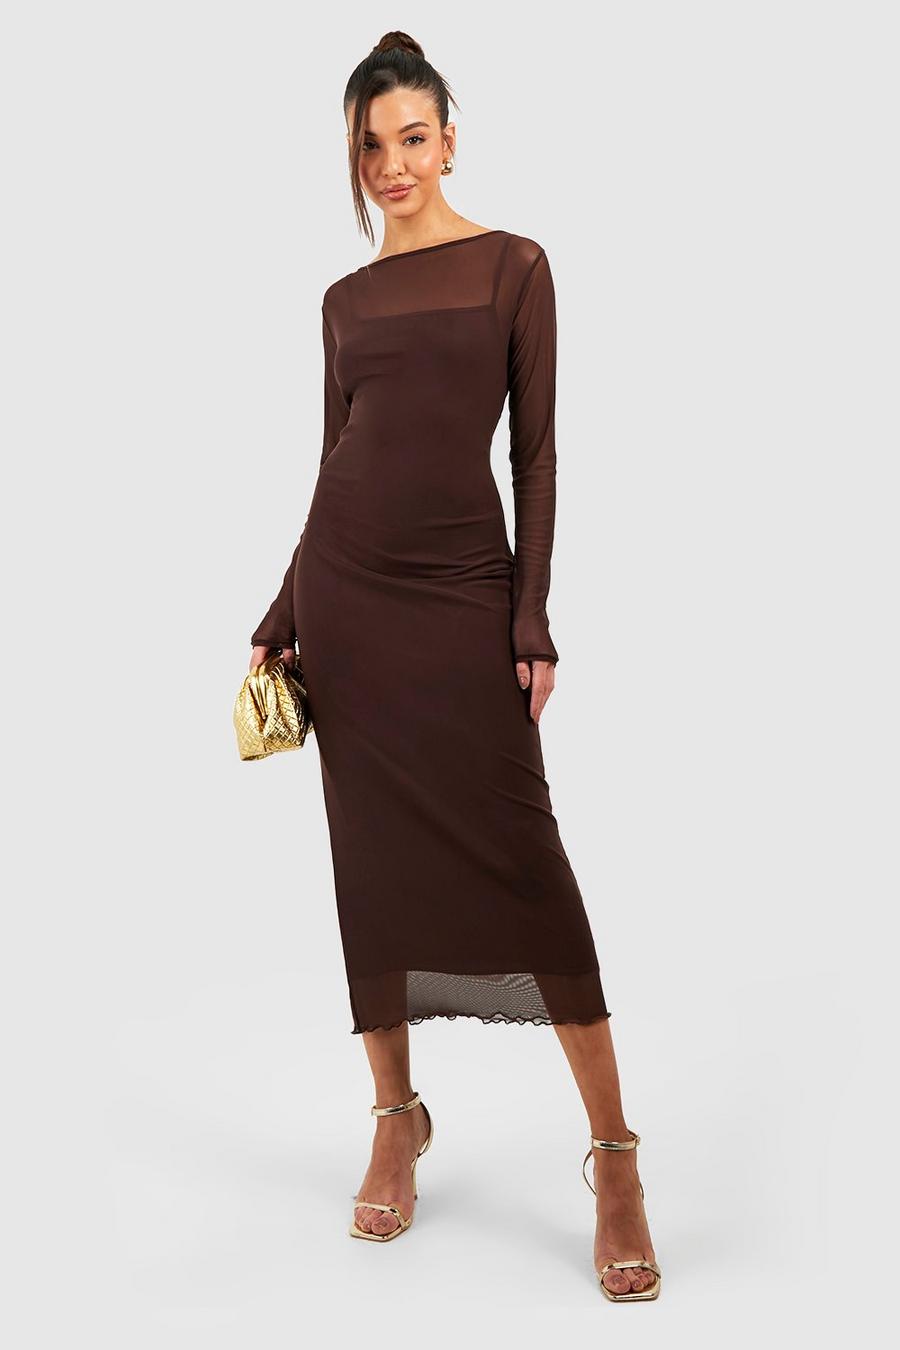 Brown All Occasion Wear